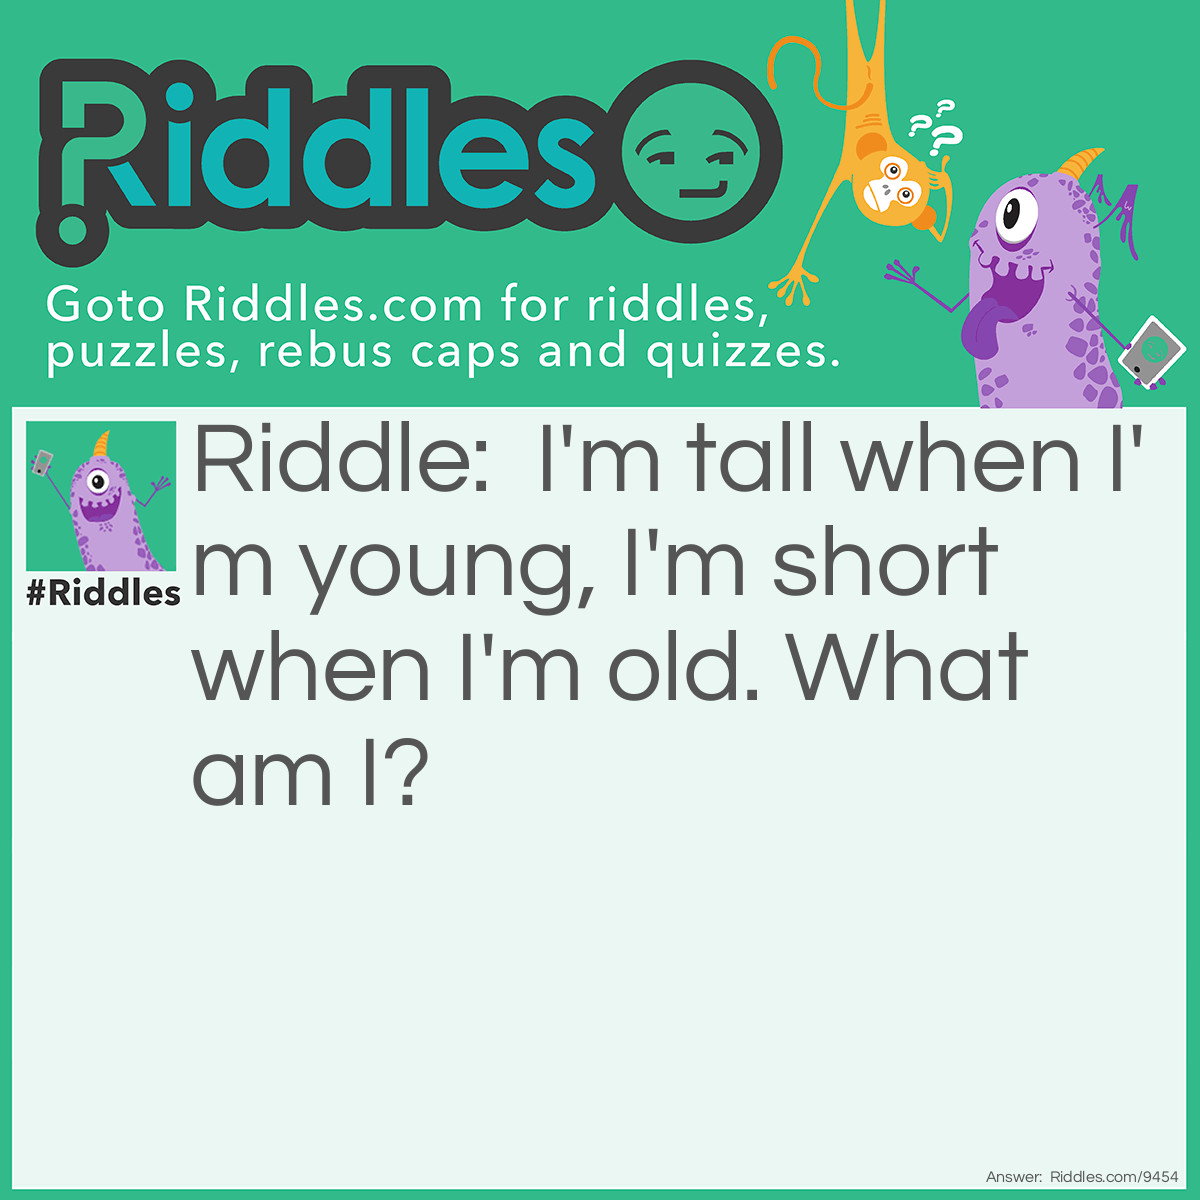 Riddle: I'm tall when I'm young, I'm short when I'm old. What am I? Answer: Pencil.